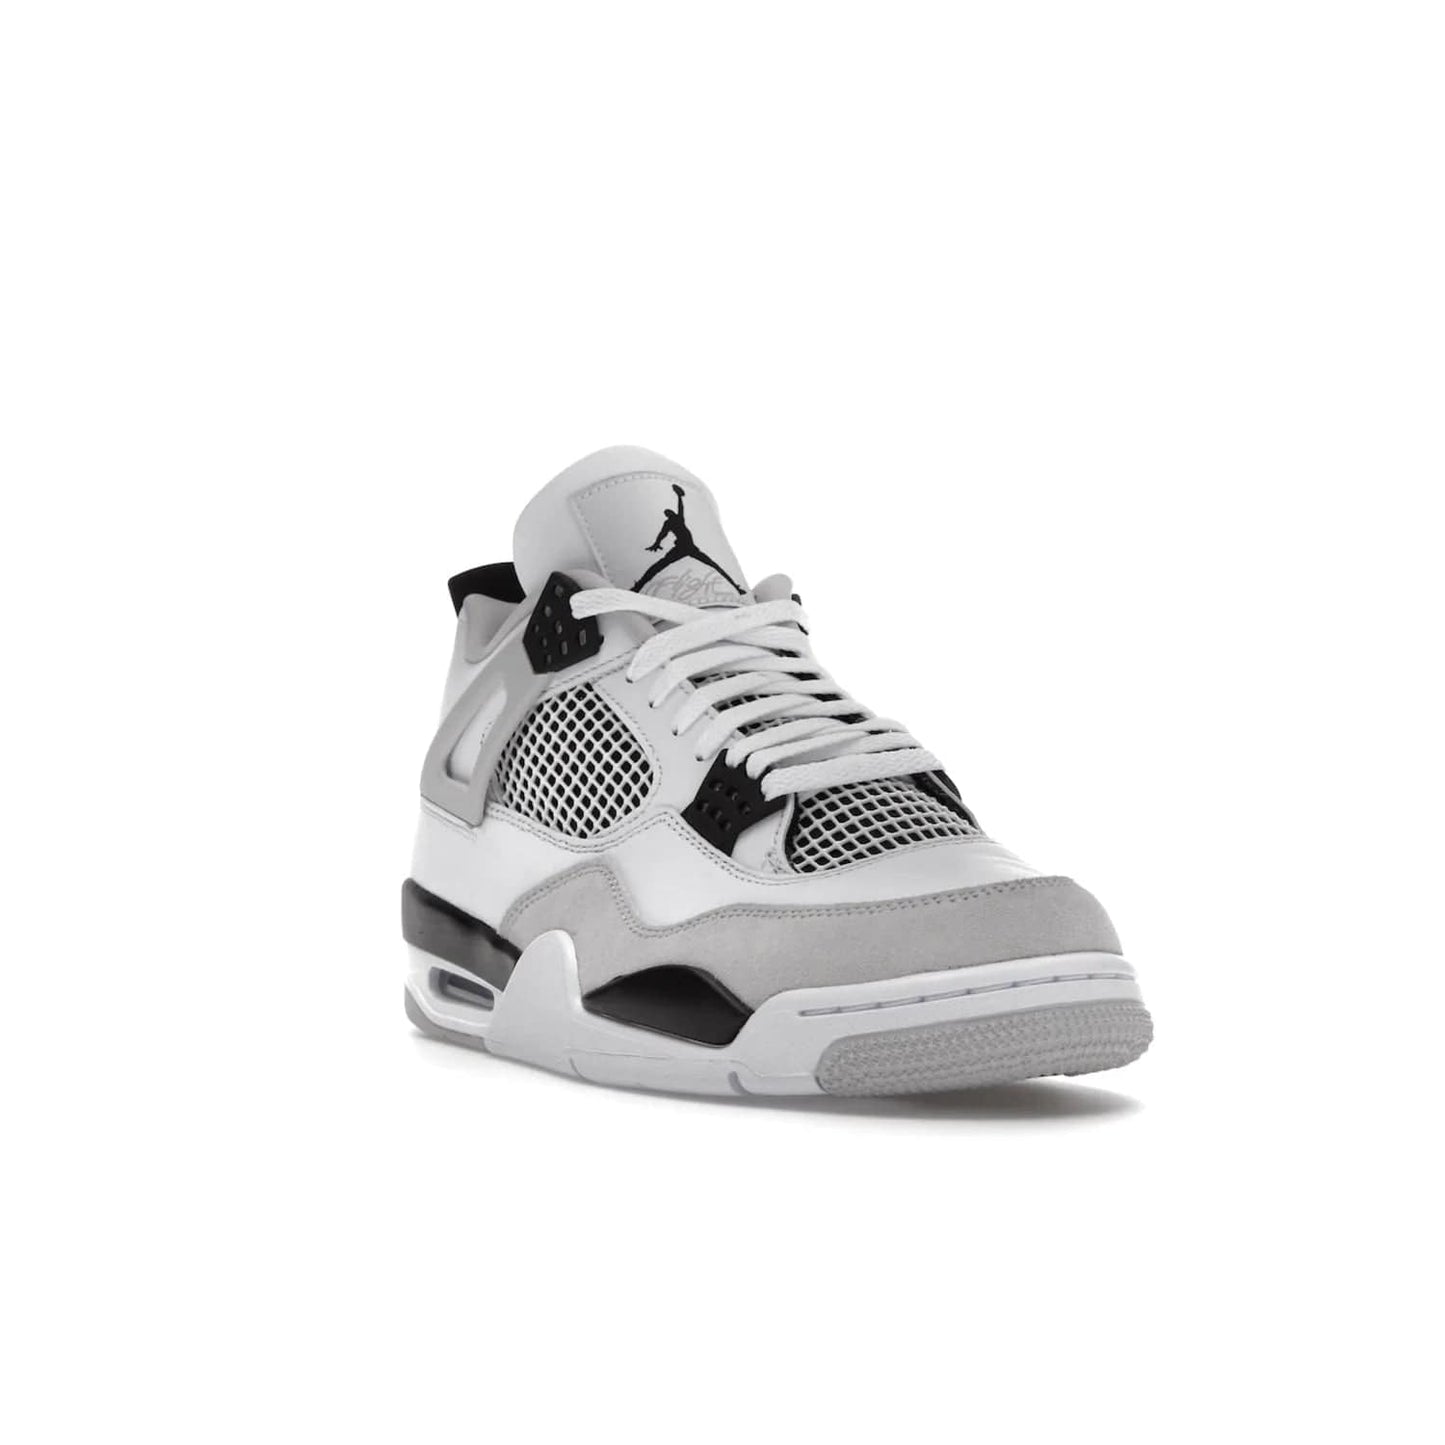 Jordan 4 Retro Military Black - Image 7 - Only at www.BallersClubKickz.com - Updated Air Jordan 4 style with a white/black/light grey sole and visible Air unit. Released in May 2022, offering timeless classic style and comfort.